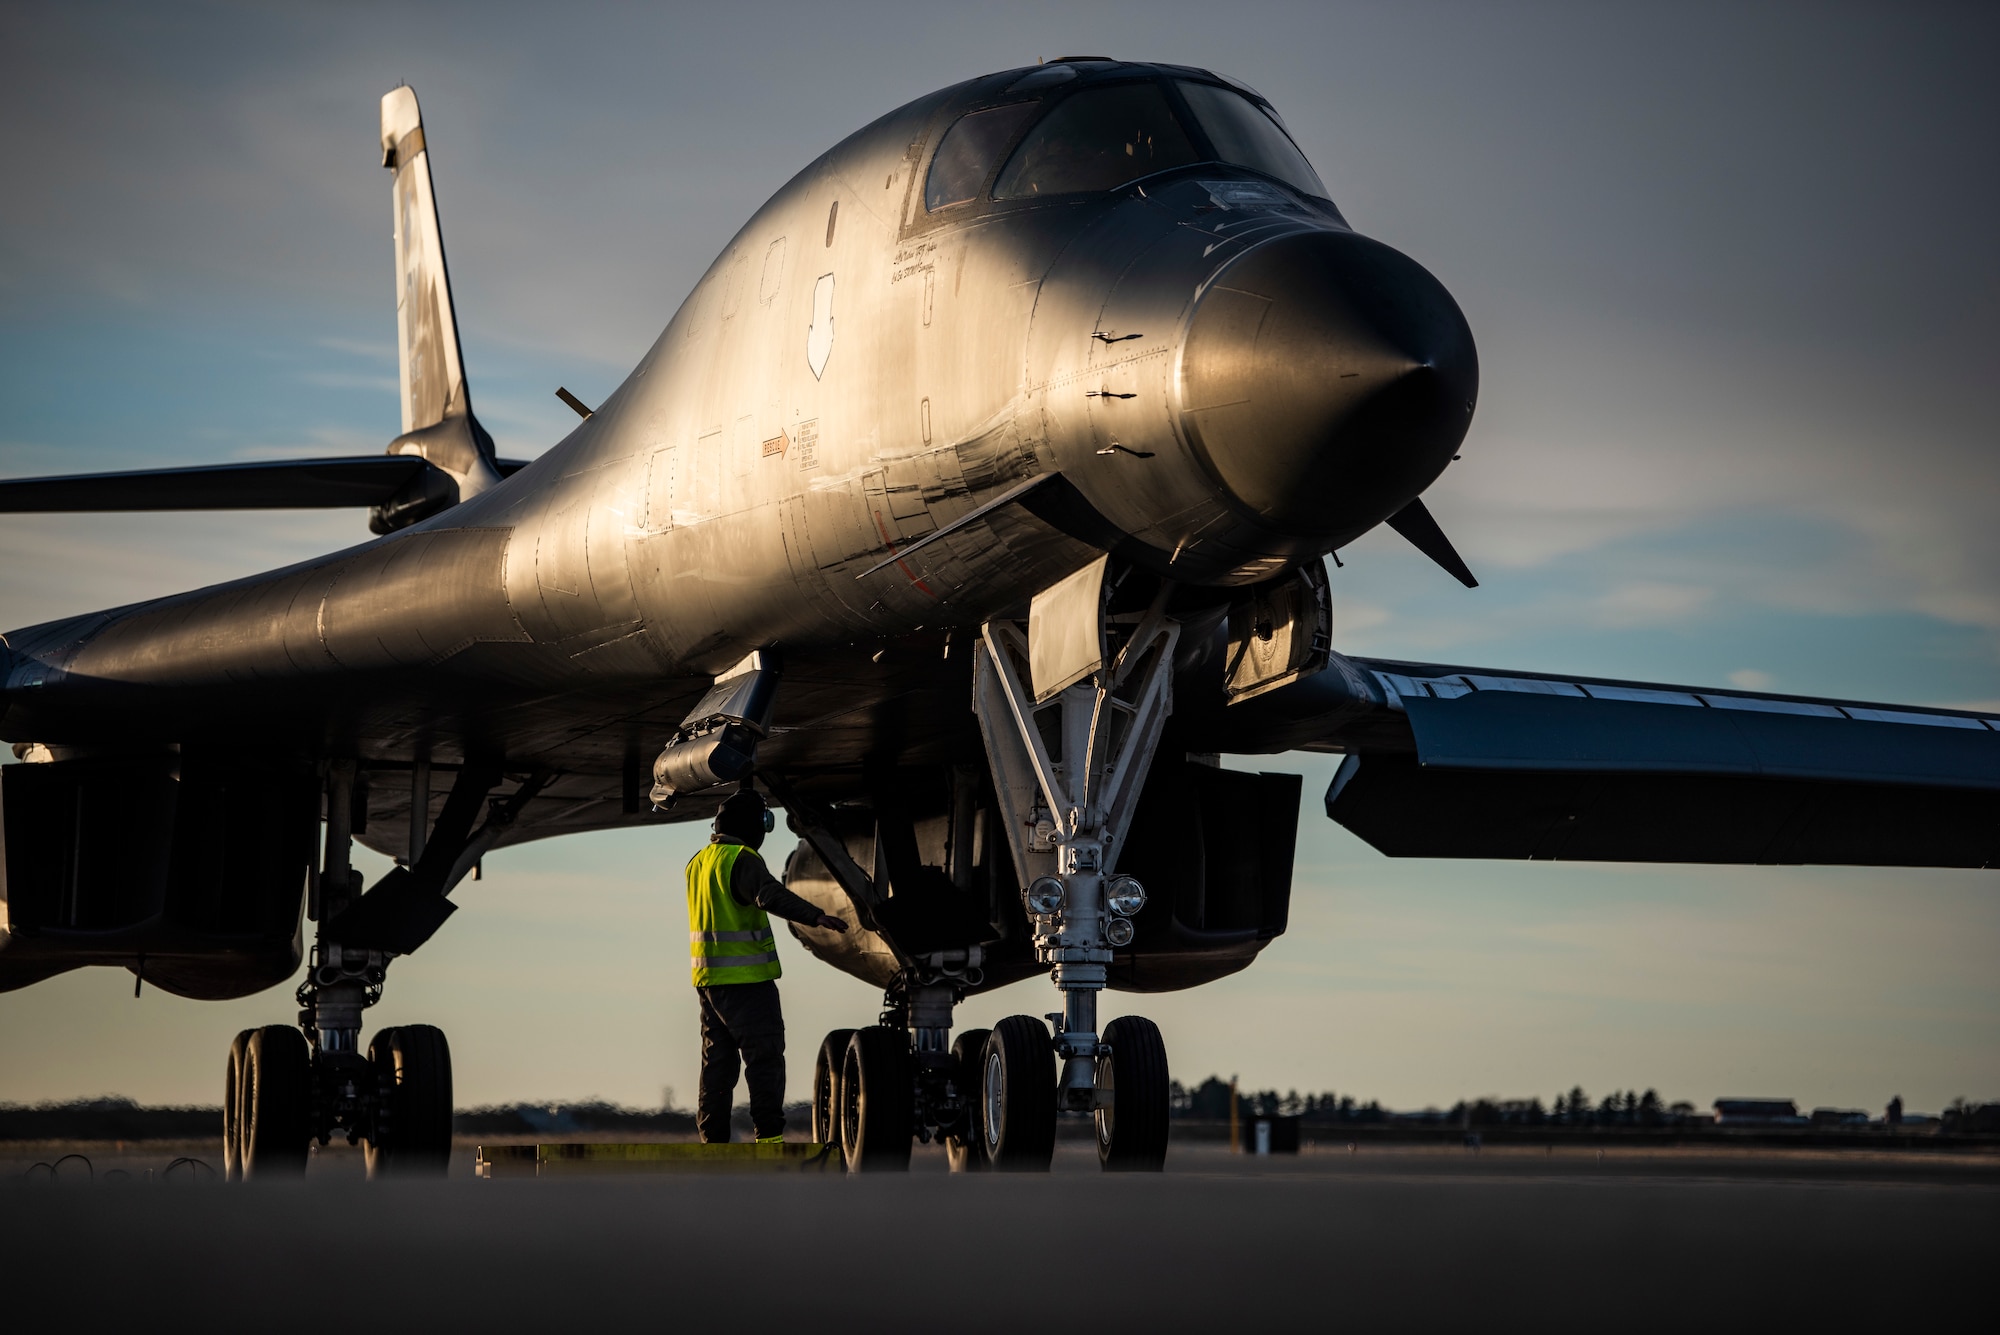 A crew chief assigned to the 9th Expeditionary Bomb Squadron marshals a B-1B Lancer at Ørland Air Force Station, Norway, March 14, 2021. Conducting bomber training missions allows aircrew to maintain a high state of readiness and proficiency, and validate the U.S. Air Force’s always-ready global strike capability. (U.S. Air Force photo by Airman 1st Class Colin Hollowell)